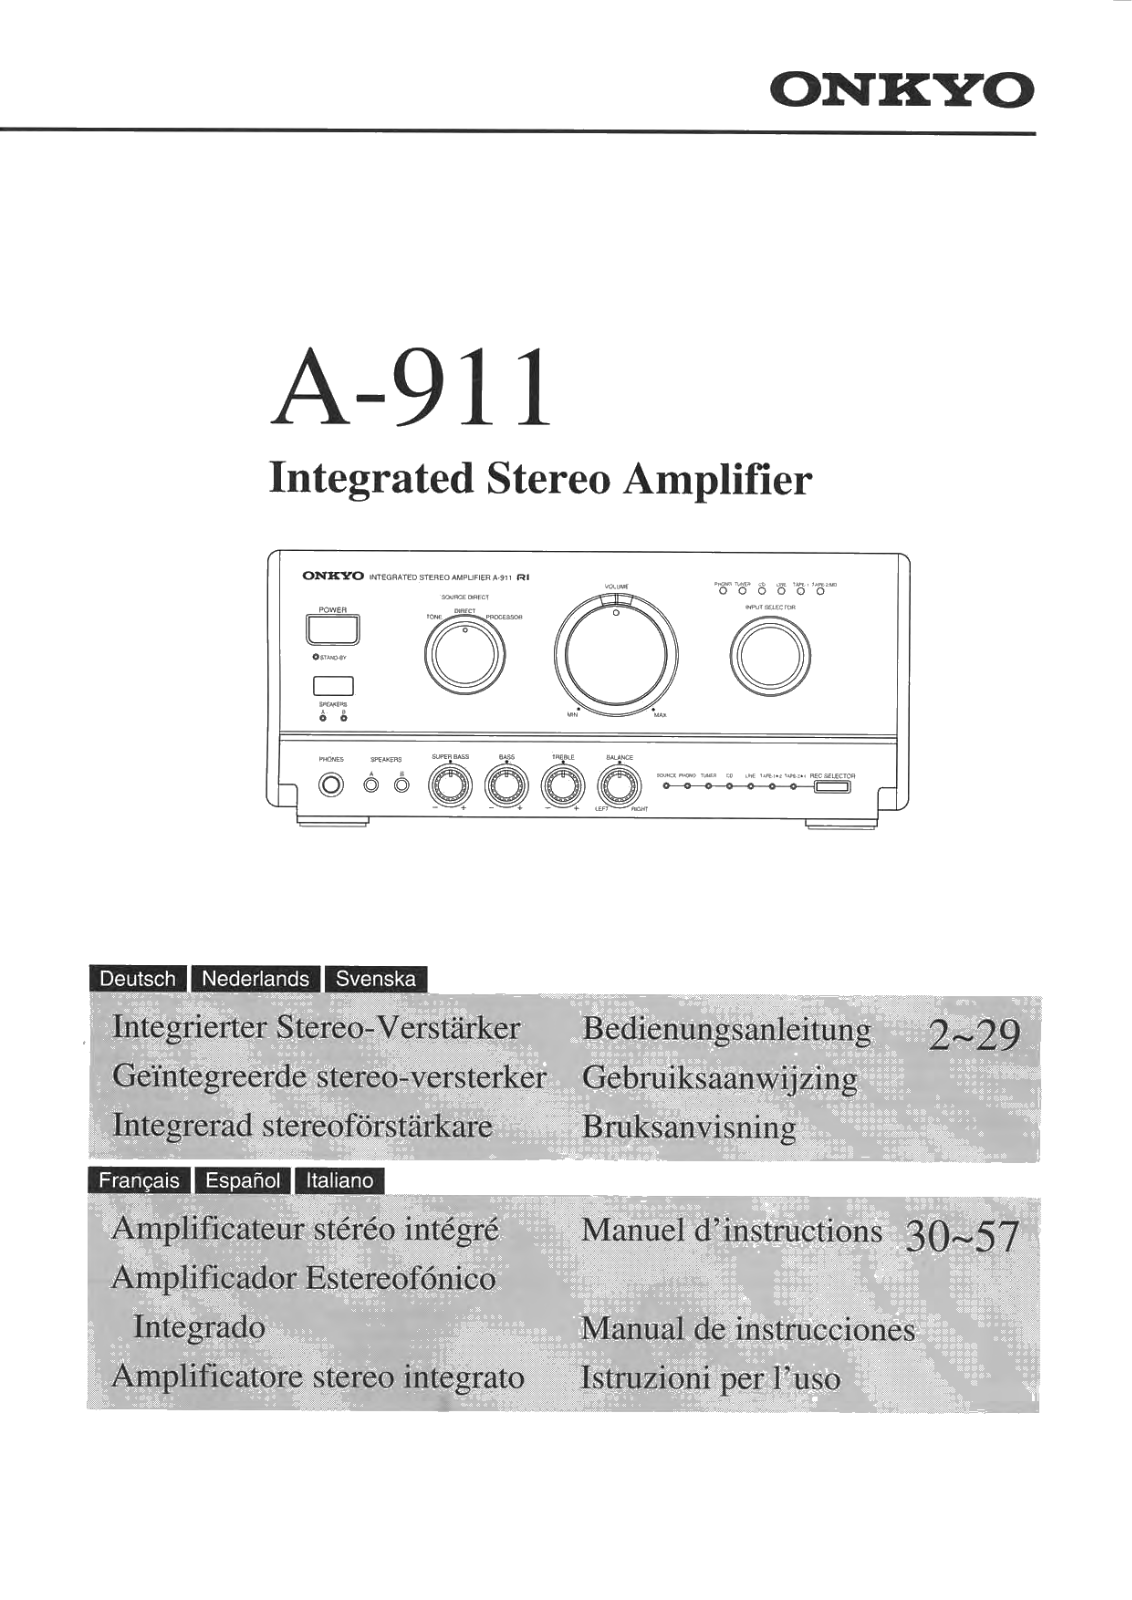 Onkyo A-911 Owners Manual